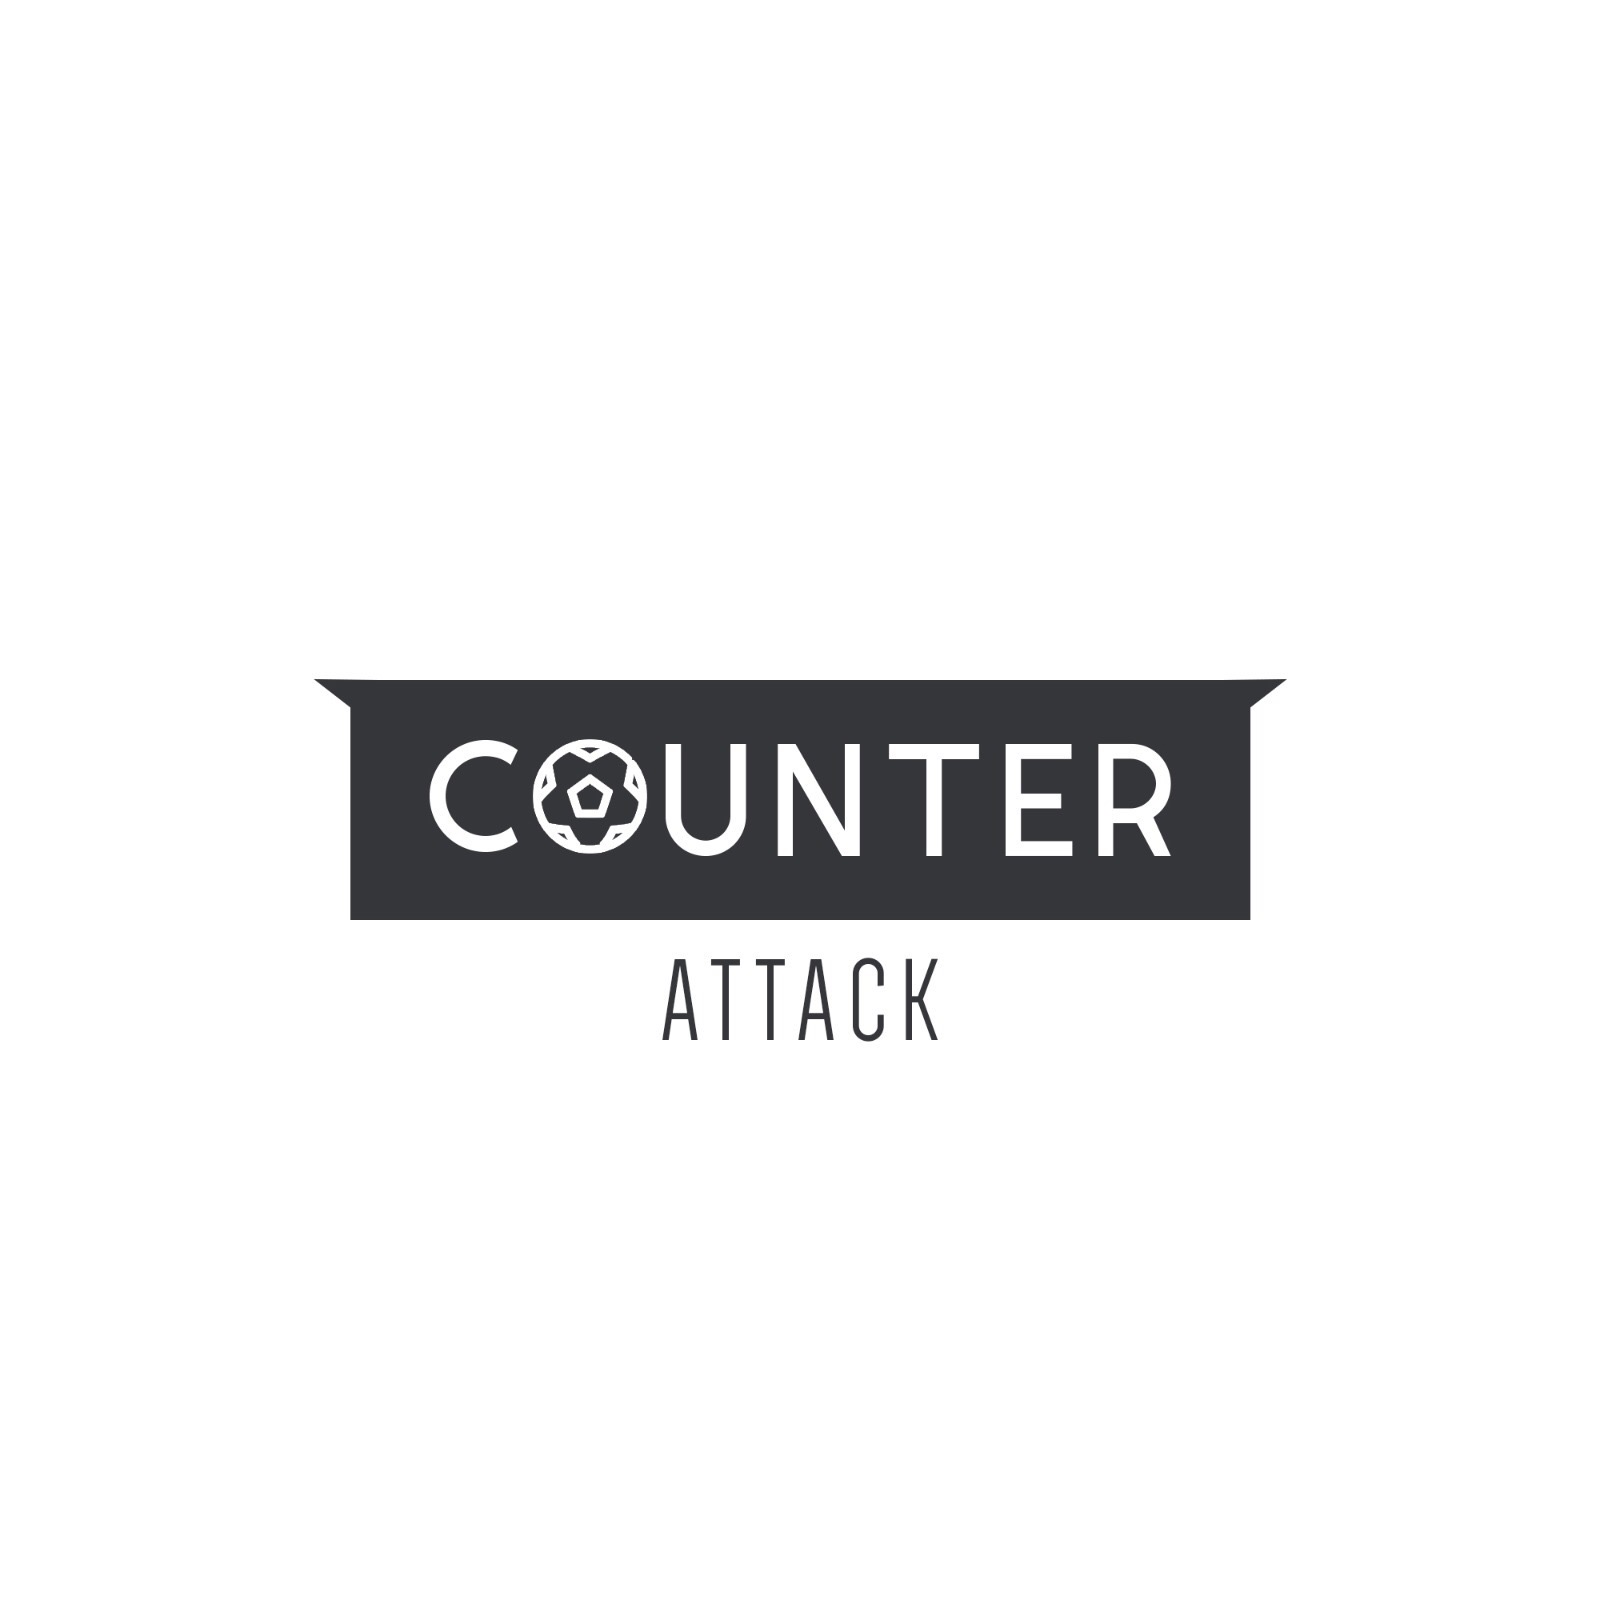 Counter Attack - Episode 105 - Lock Down Call A Friend With Bradley Johnson